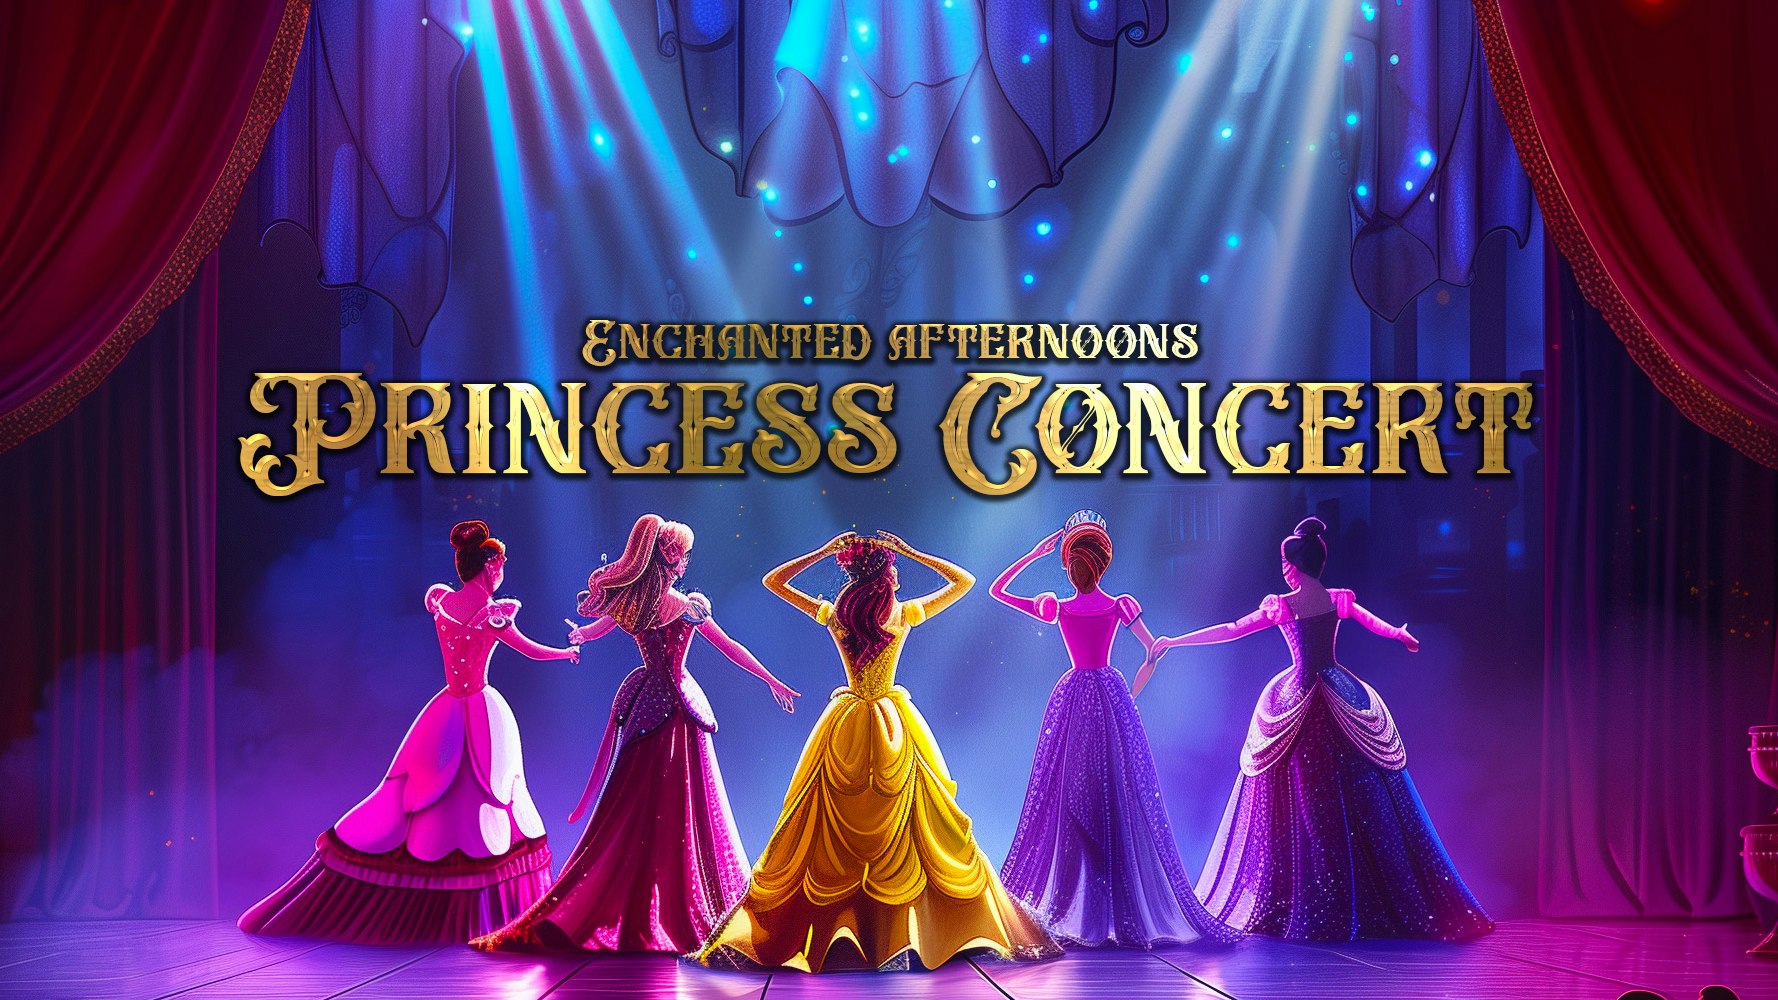 👑✨ Enchanted Afternoon Princess Concert Comes To Newcastle ✨👑